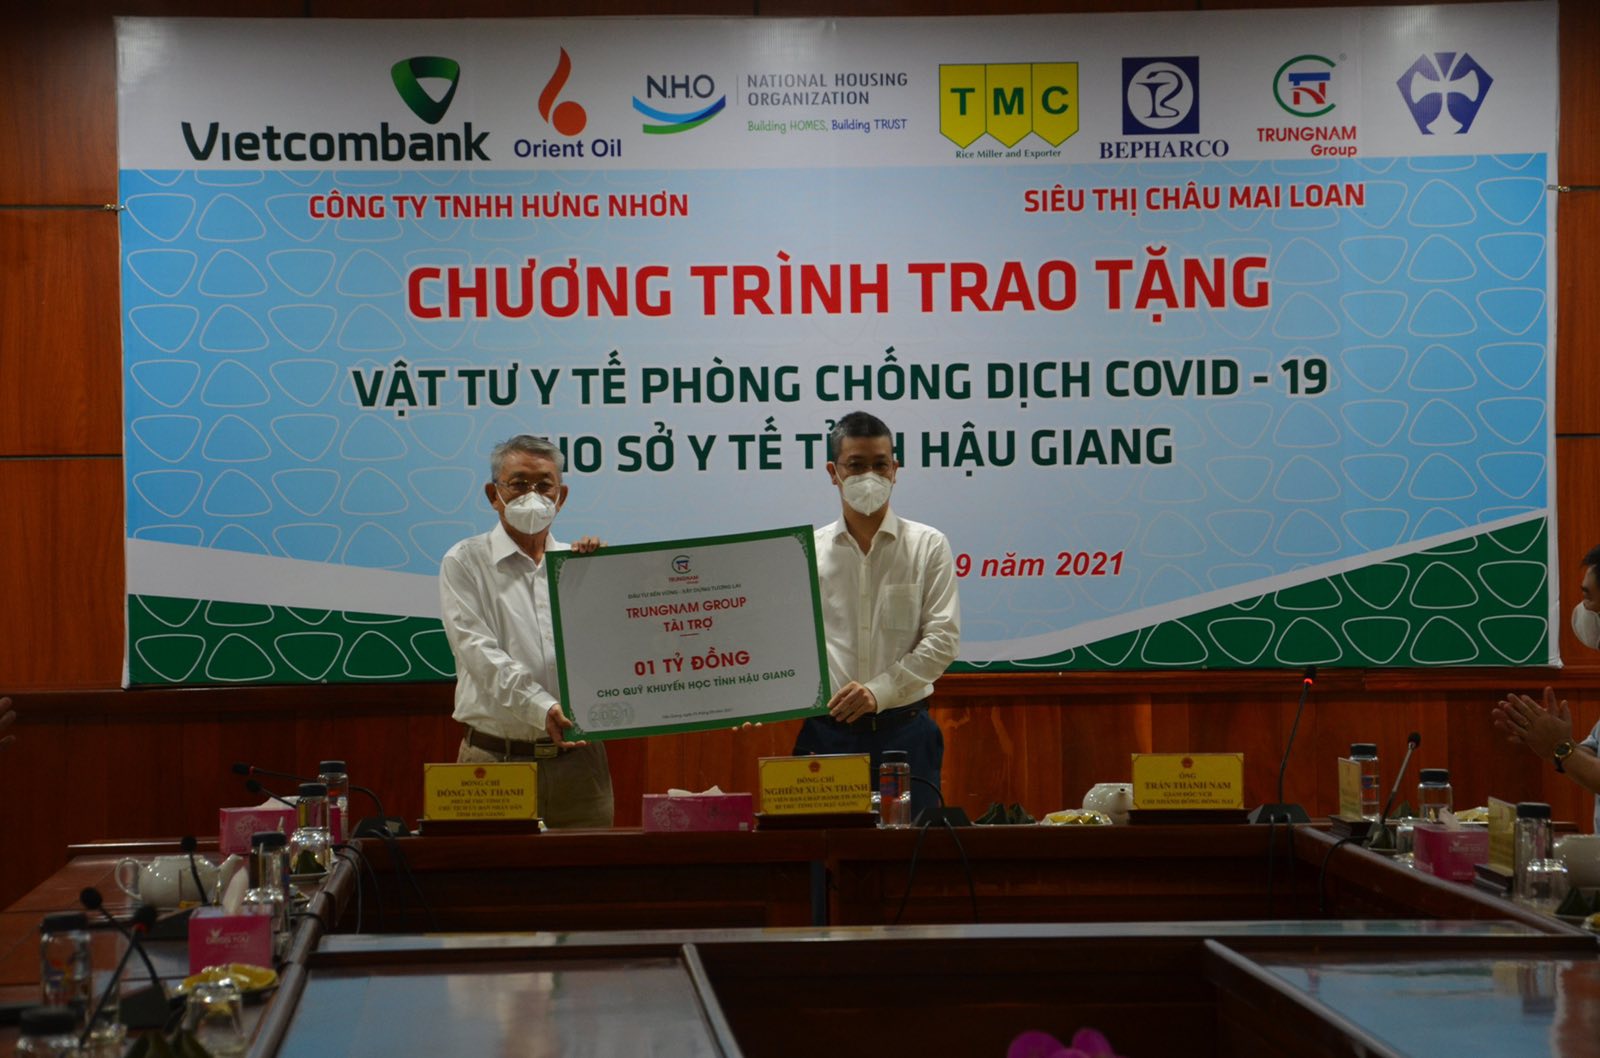 TRUONGNAM GROUP GIVES TO HAU GIANG 3,000 COVID-19 TESTING KITs AND 1 BILLION VND